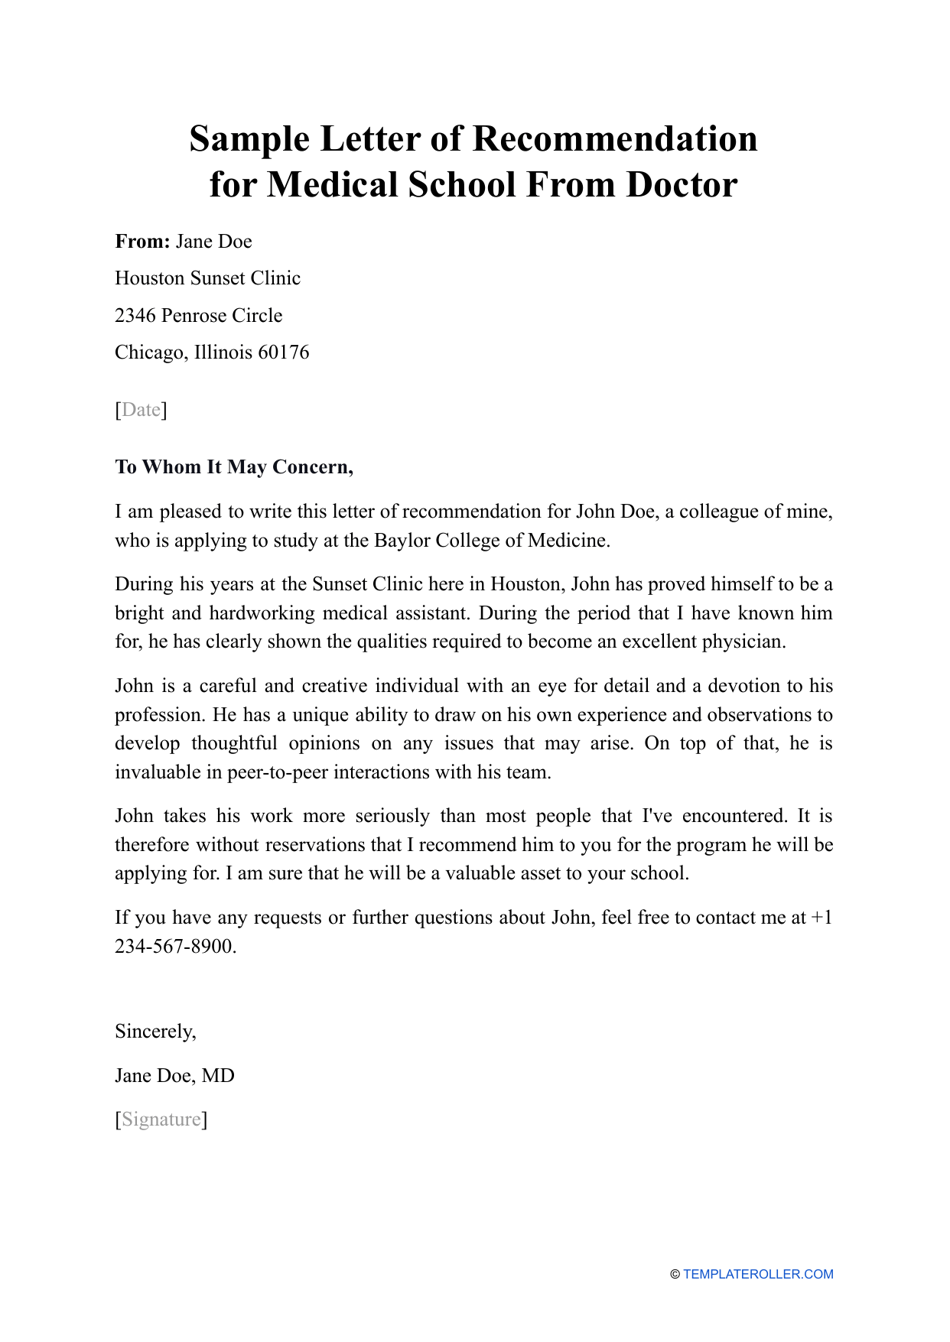 Sample Letter of Recommendation for Medical School From Doctor Within Letter Of Recommendation Request Template